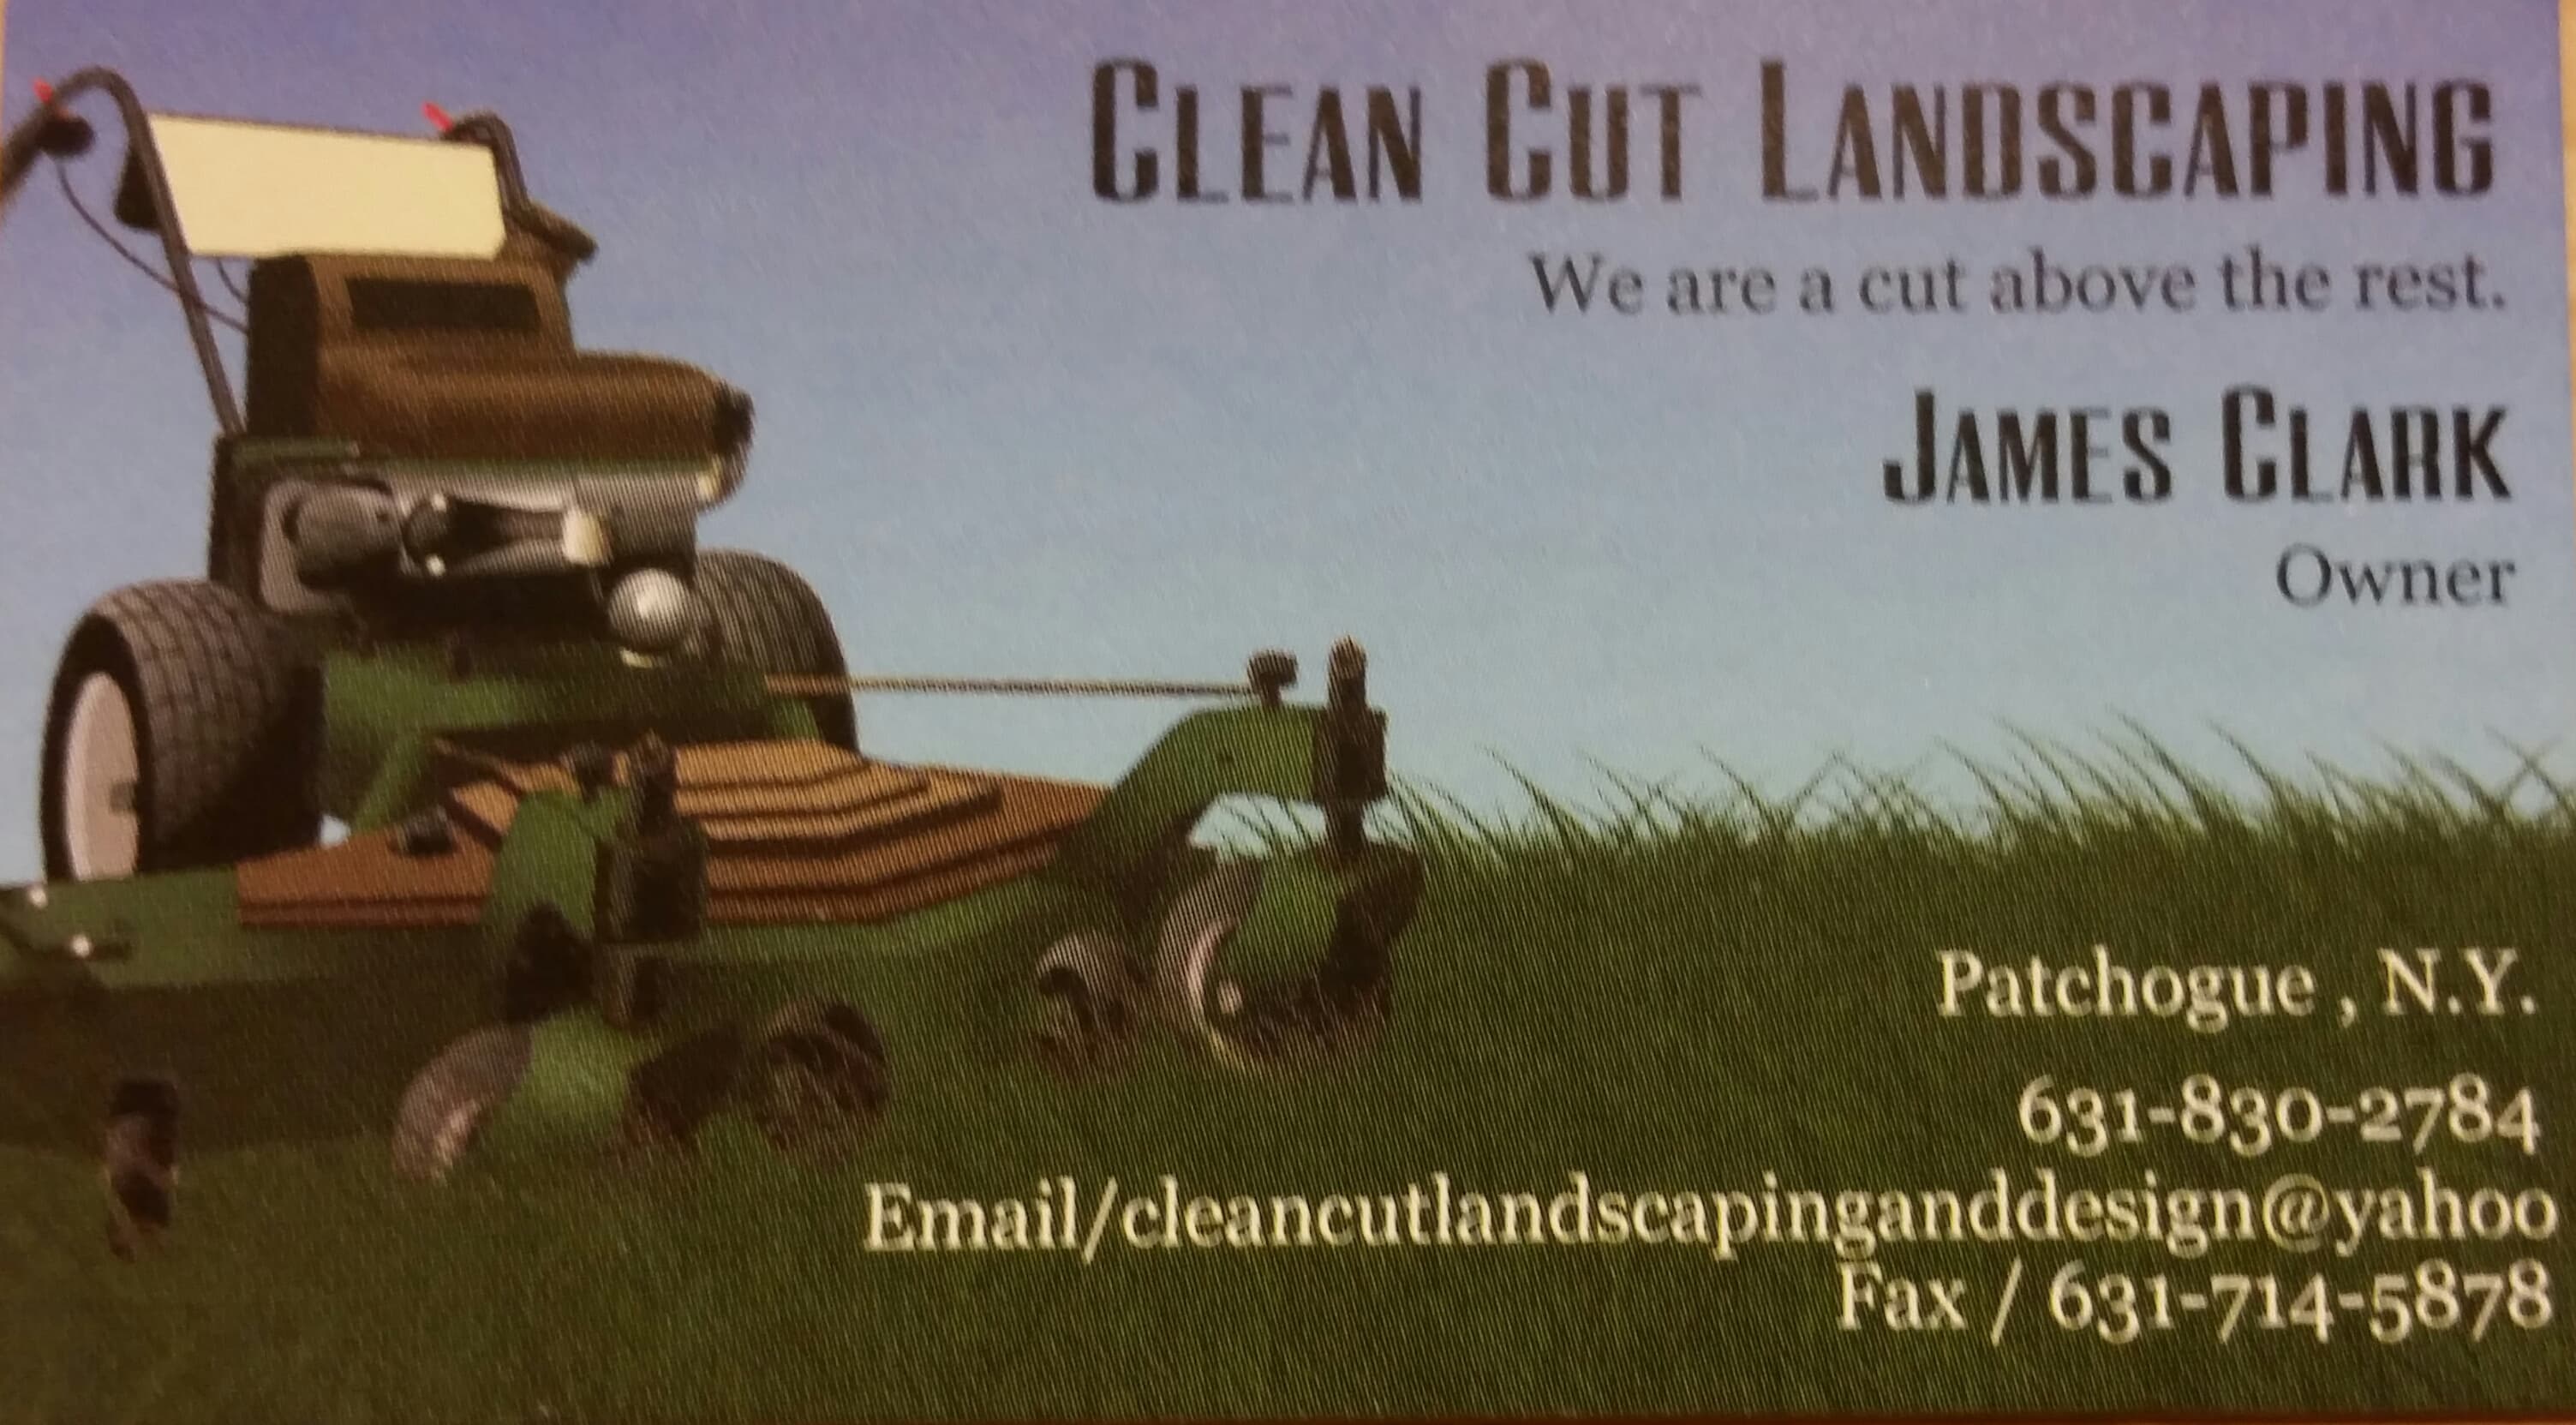 Professional Landscaping services at very reasonable, competitive prices